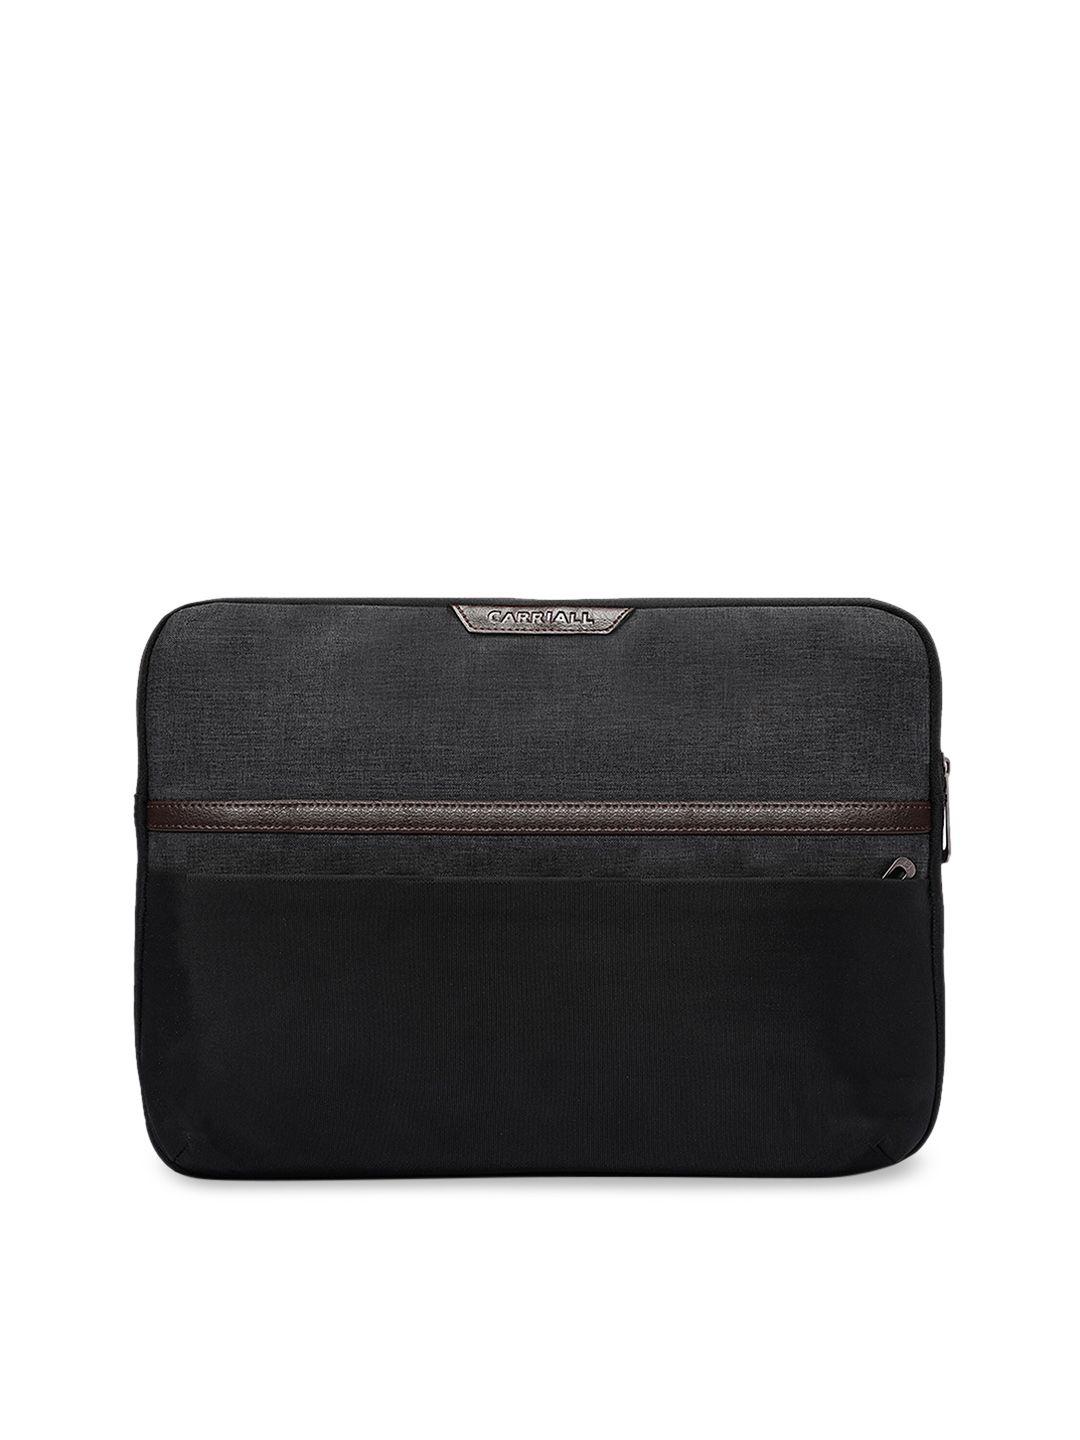 carriall unisex black solid